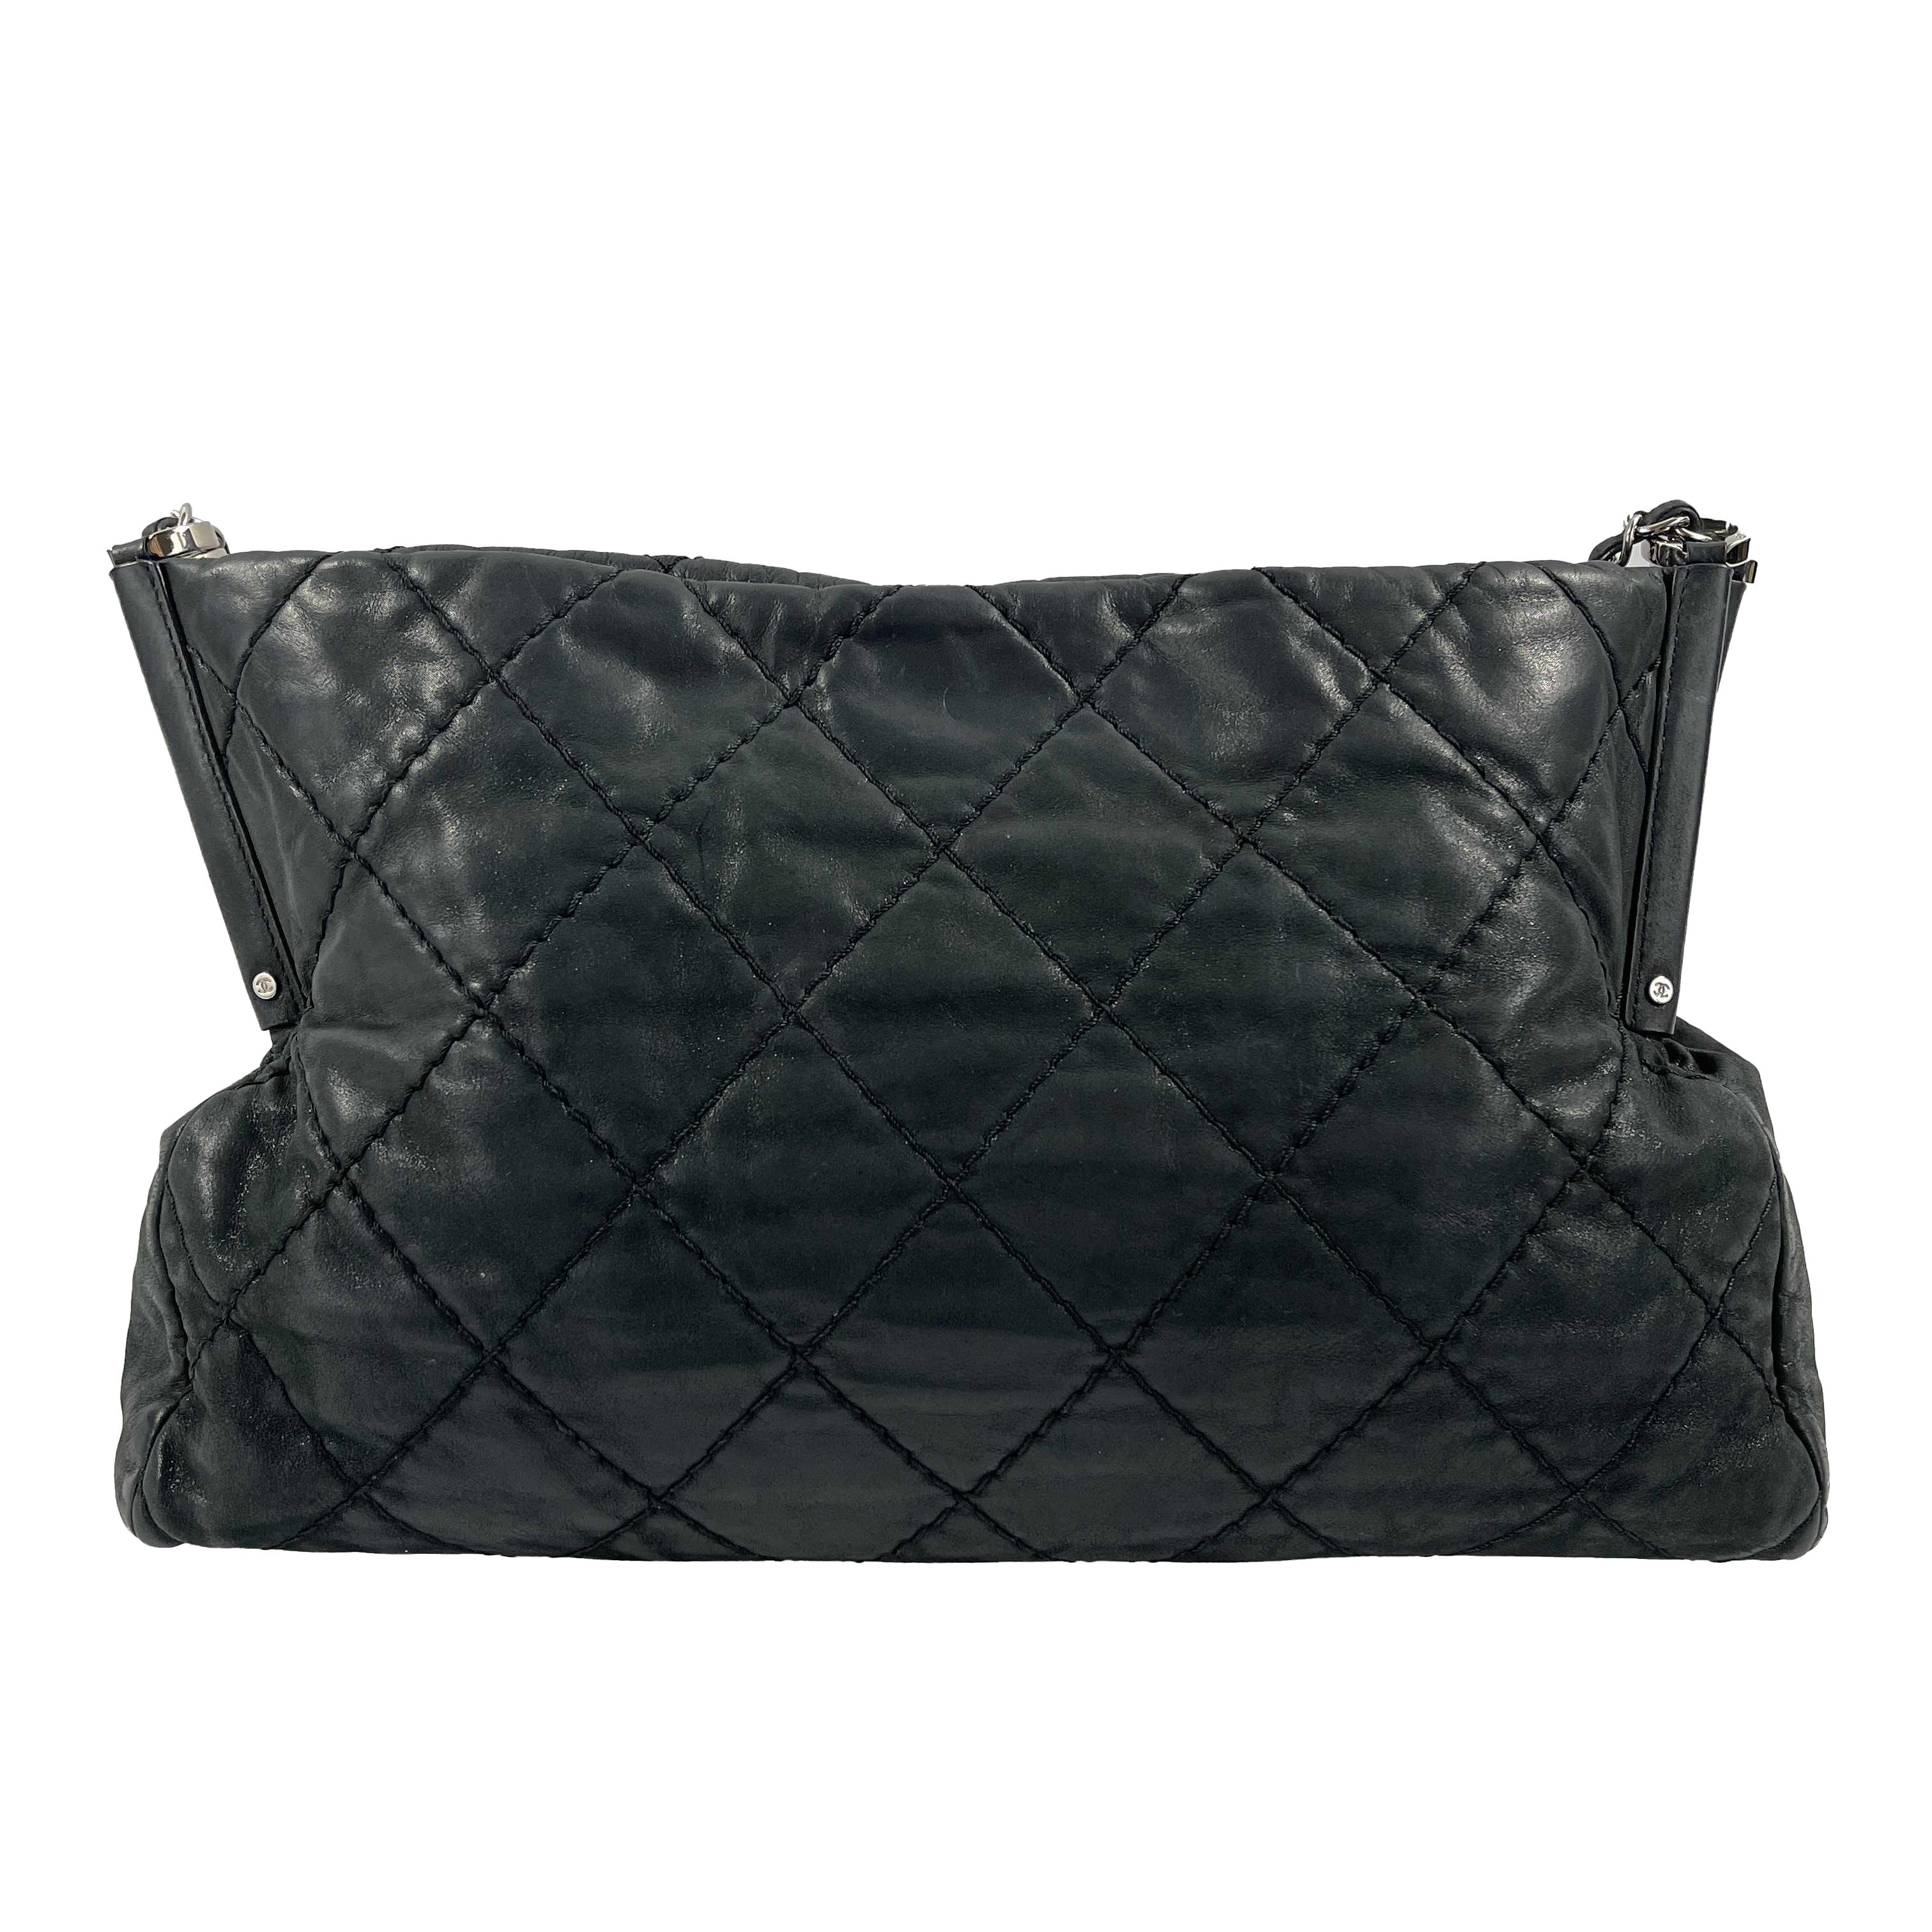 CHANEL - Sea Hit Black Iridescent CC Calfskin Medium Shoulder Bag

Description

Spring 2012 Collection.
Made in black quilted iridescent calfskin leather.
Leather shoulder straps with threaded chain links and 'CC' 'CHANEL' stamped connectors.
CC